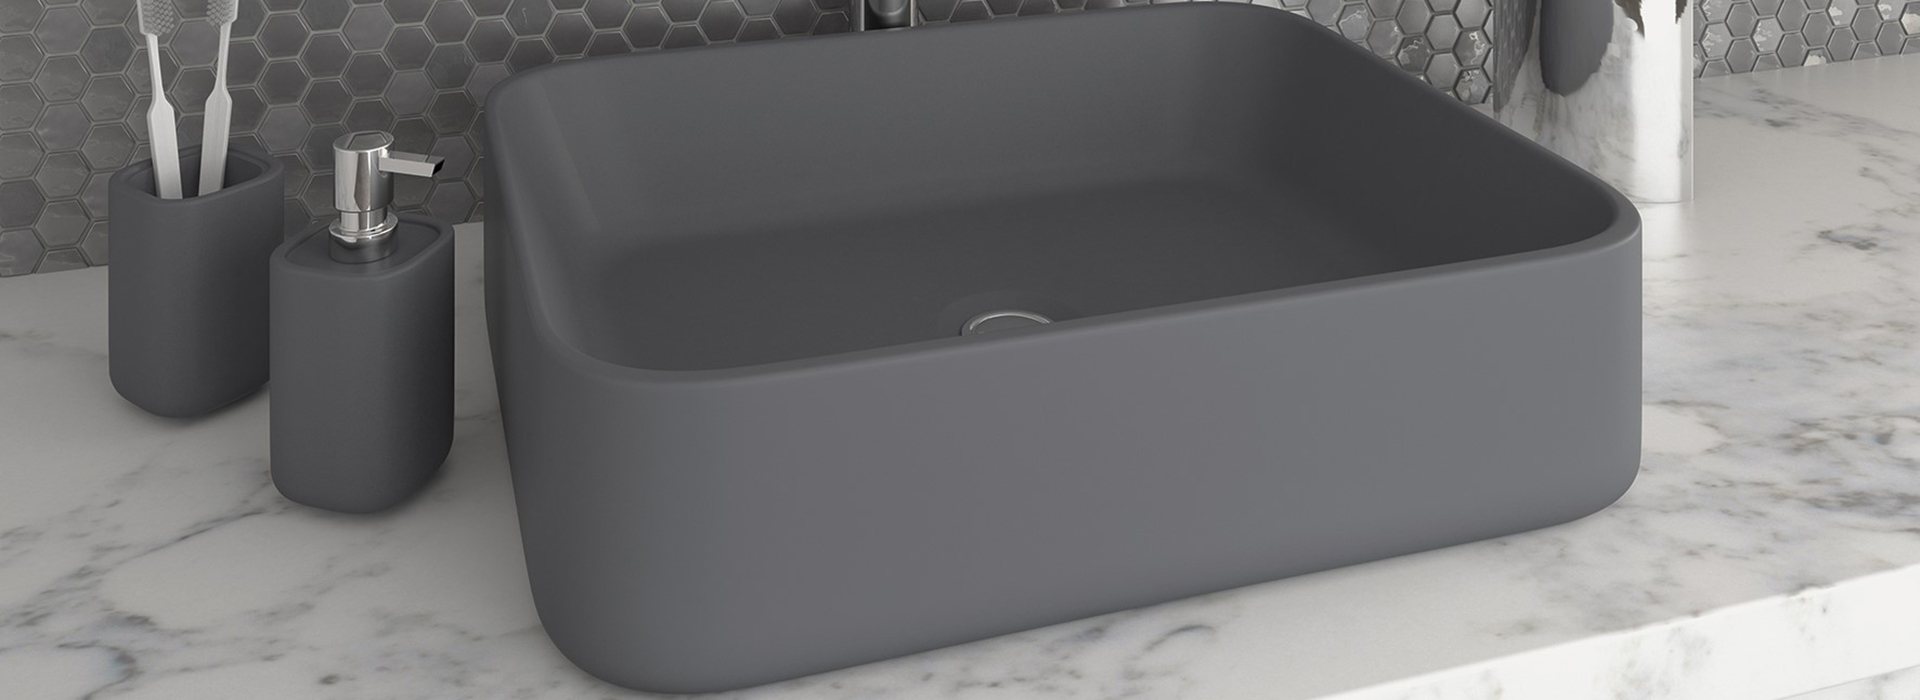 Italtile introduces Global Stone’s eco-chic Cement Basins 